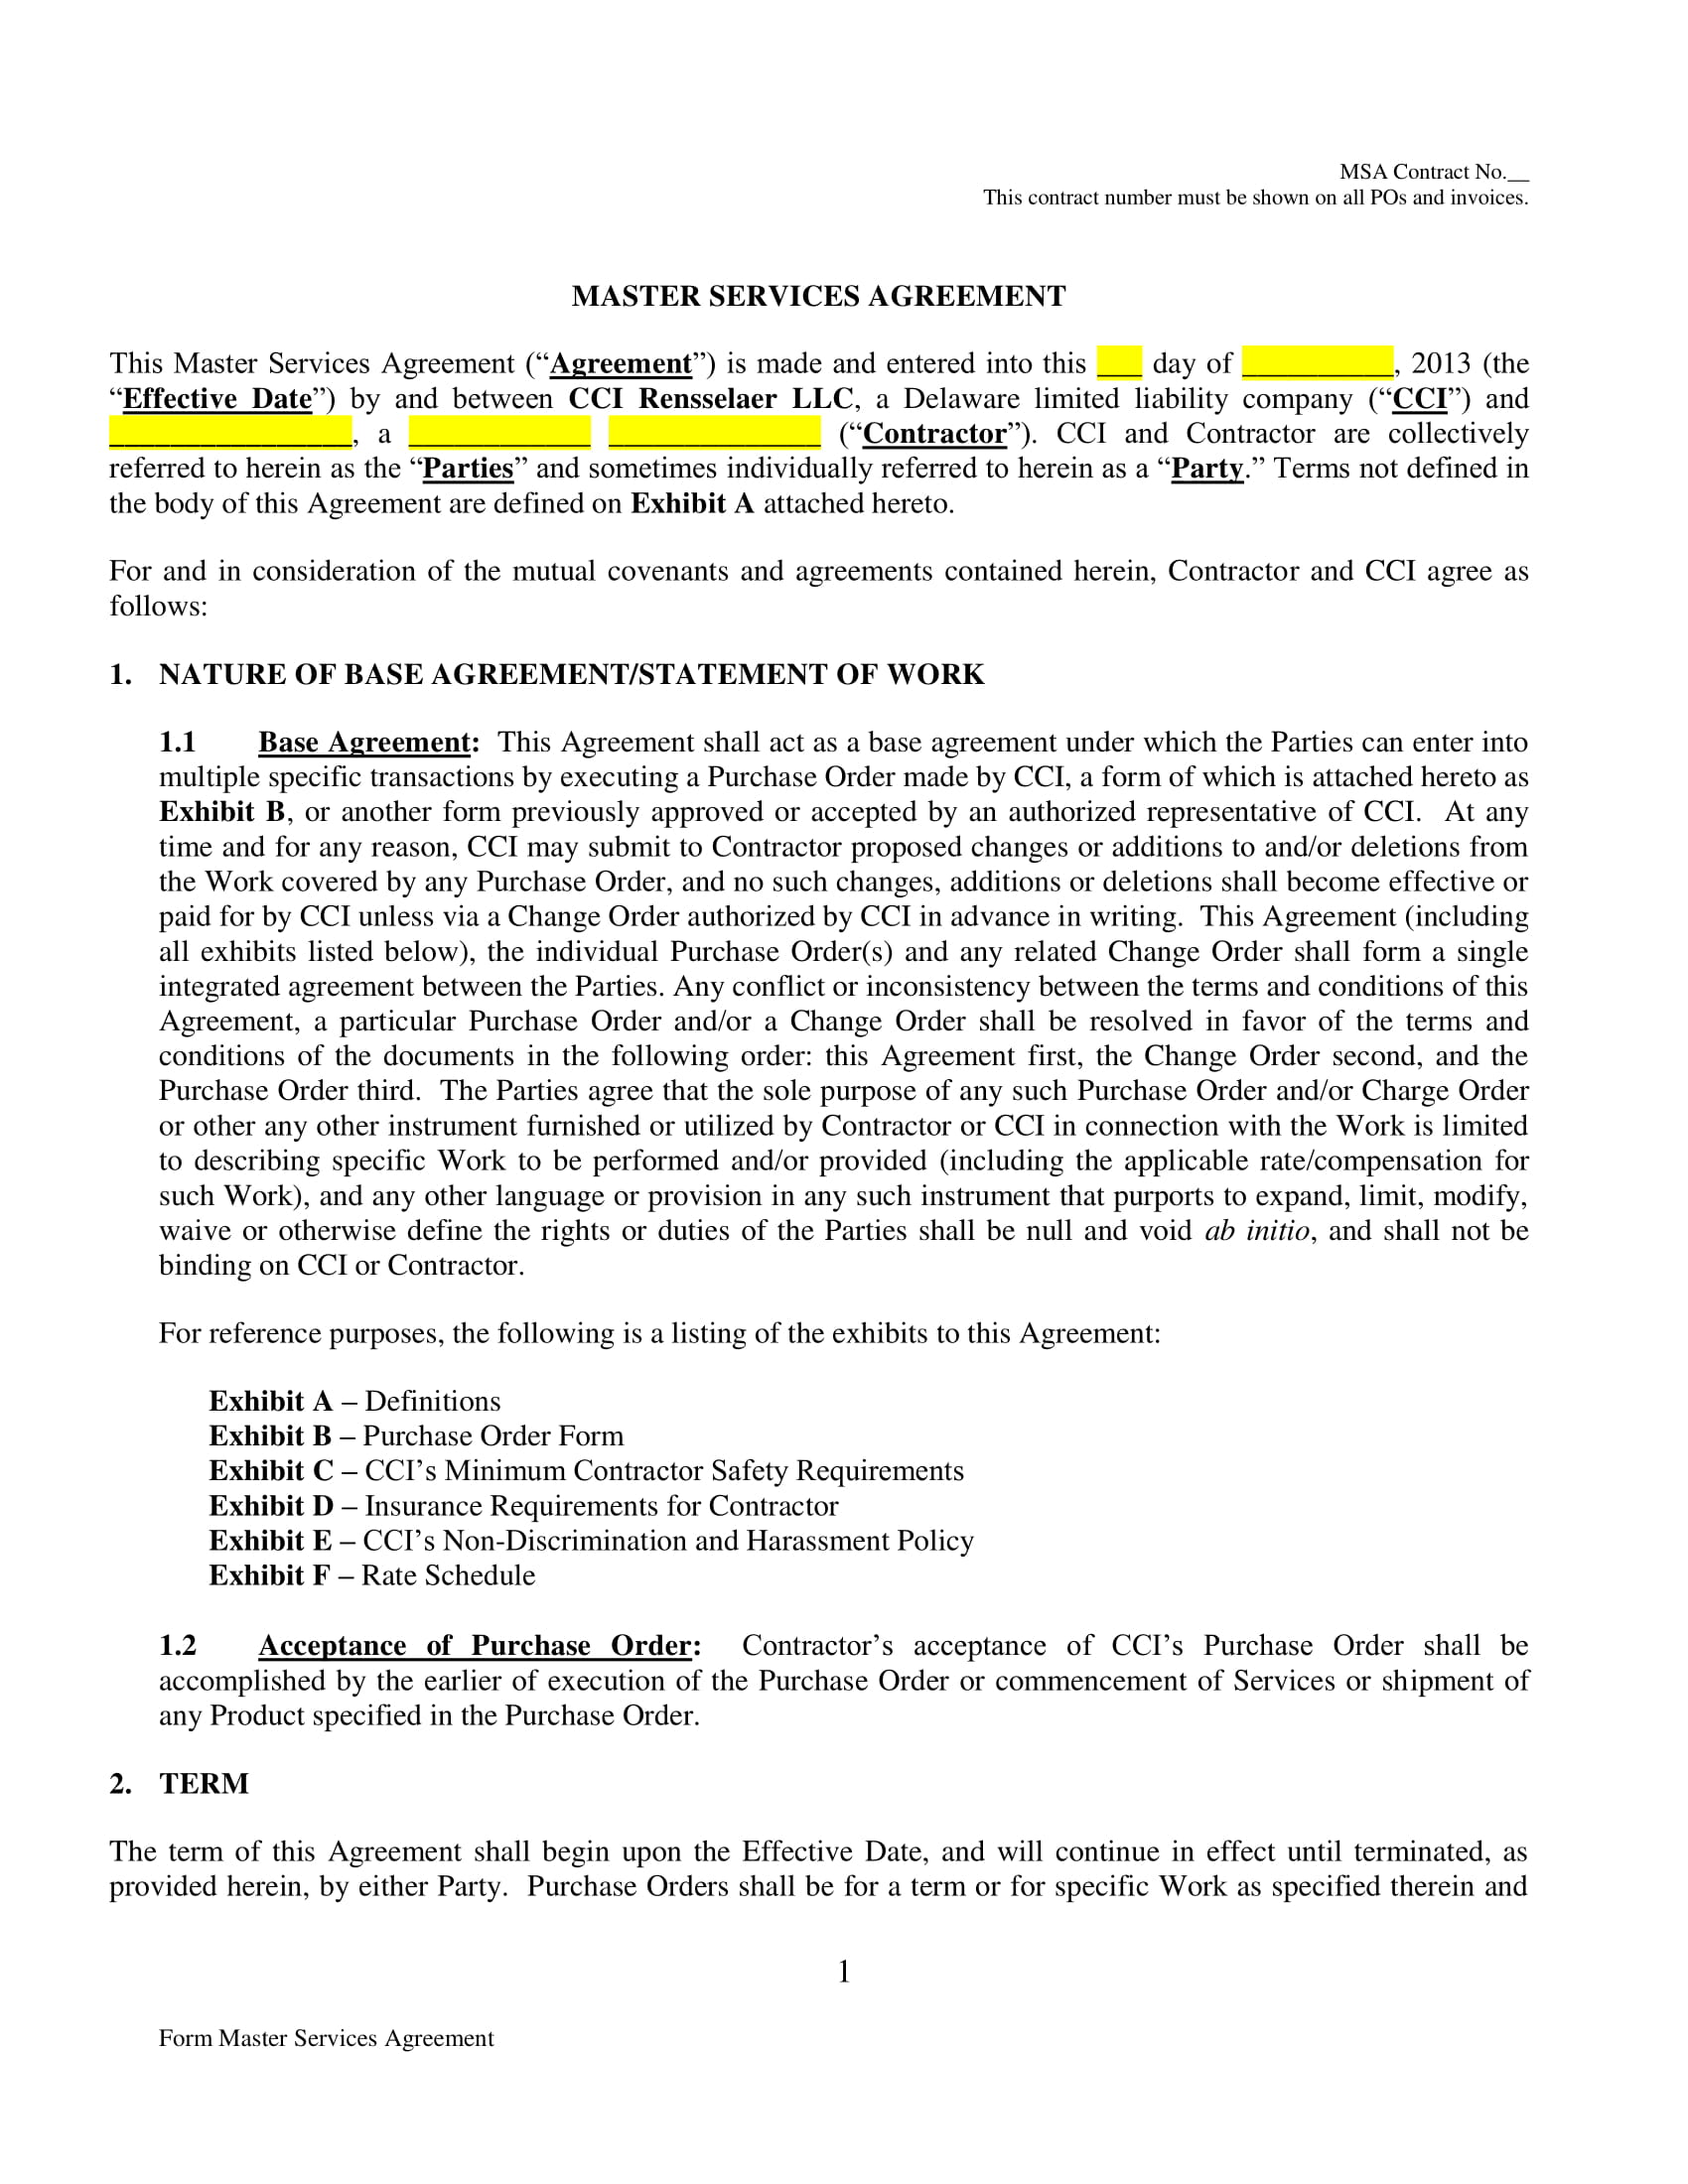 Master Services Agreement Contract Template Example 01